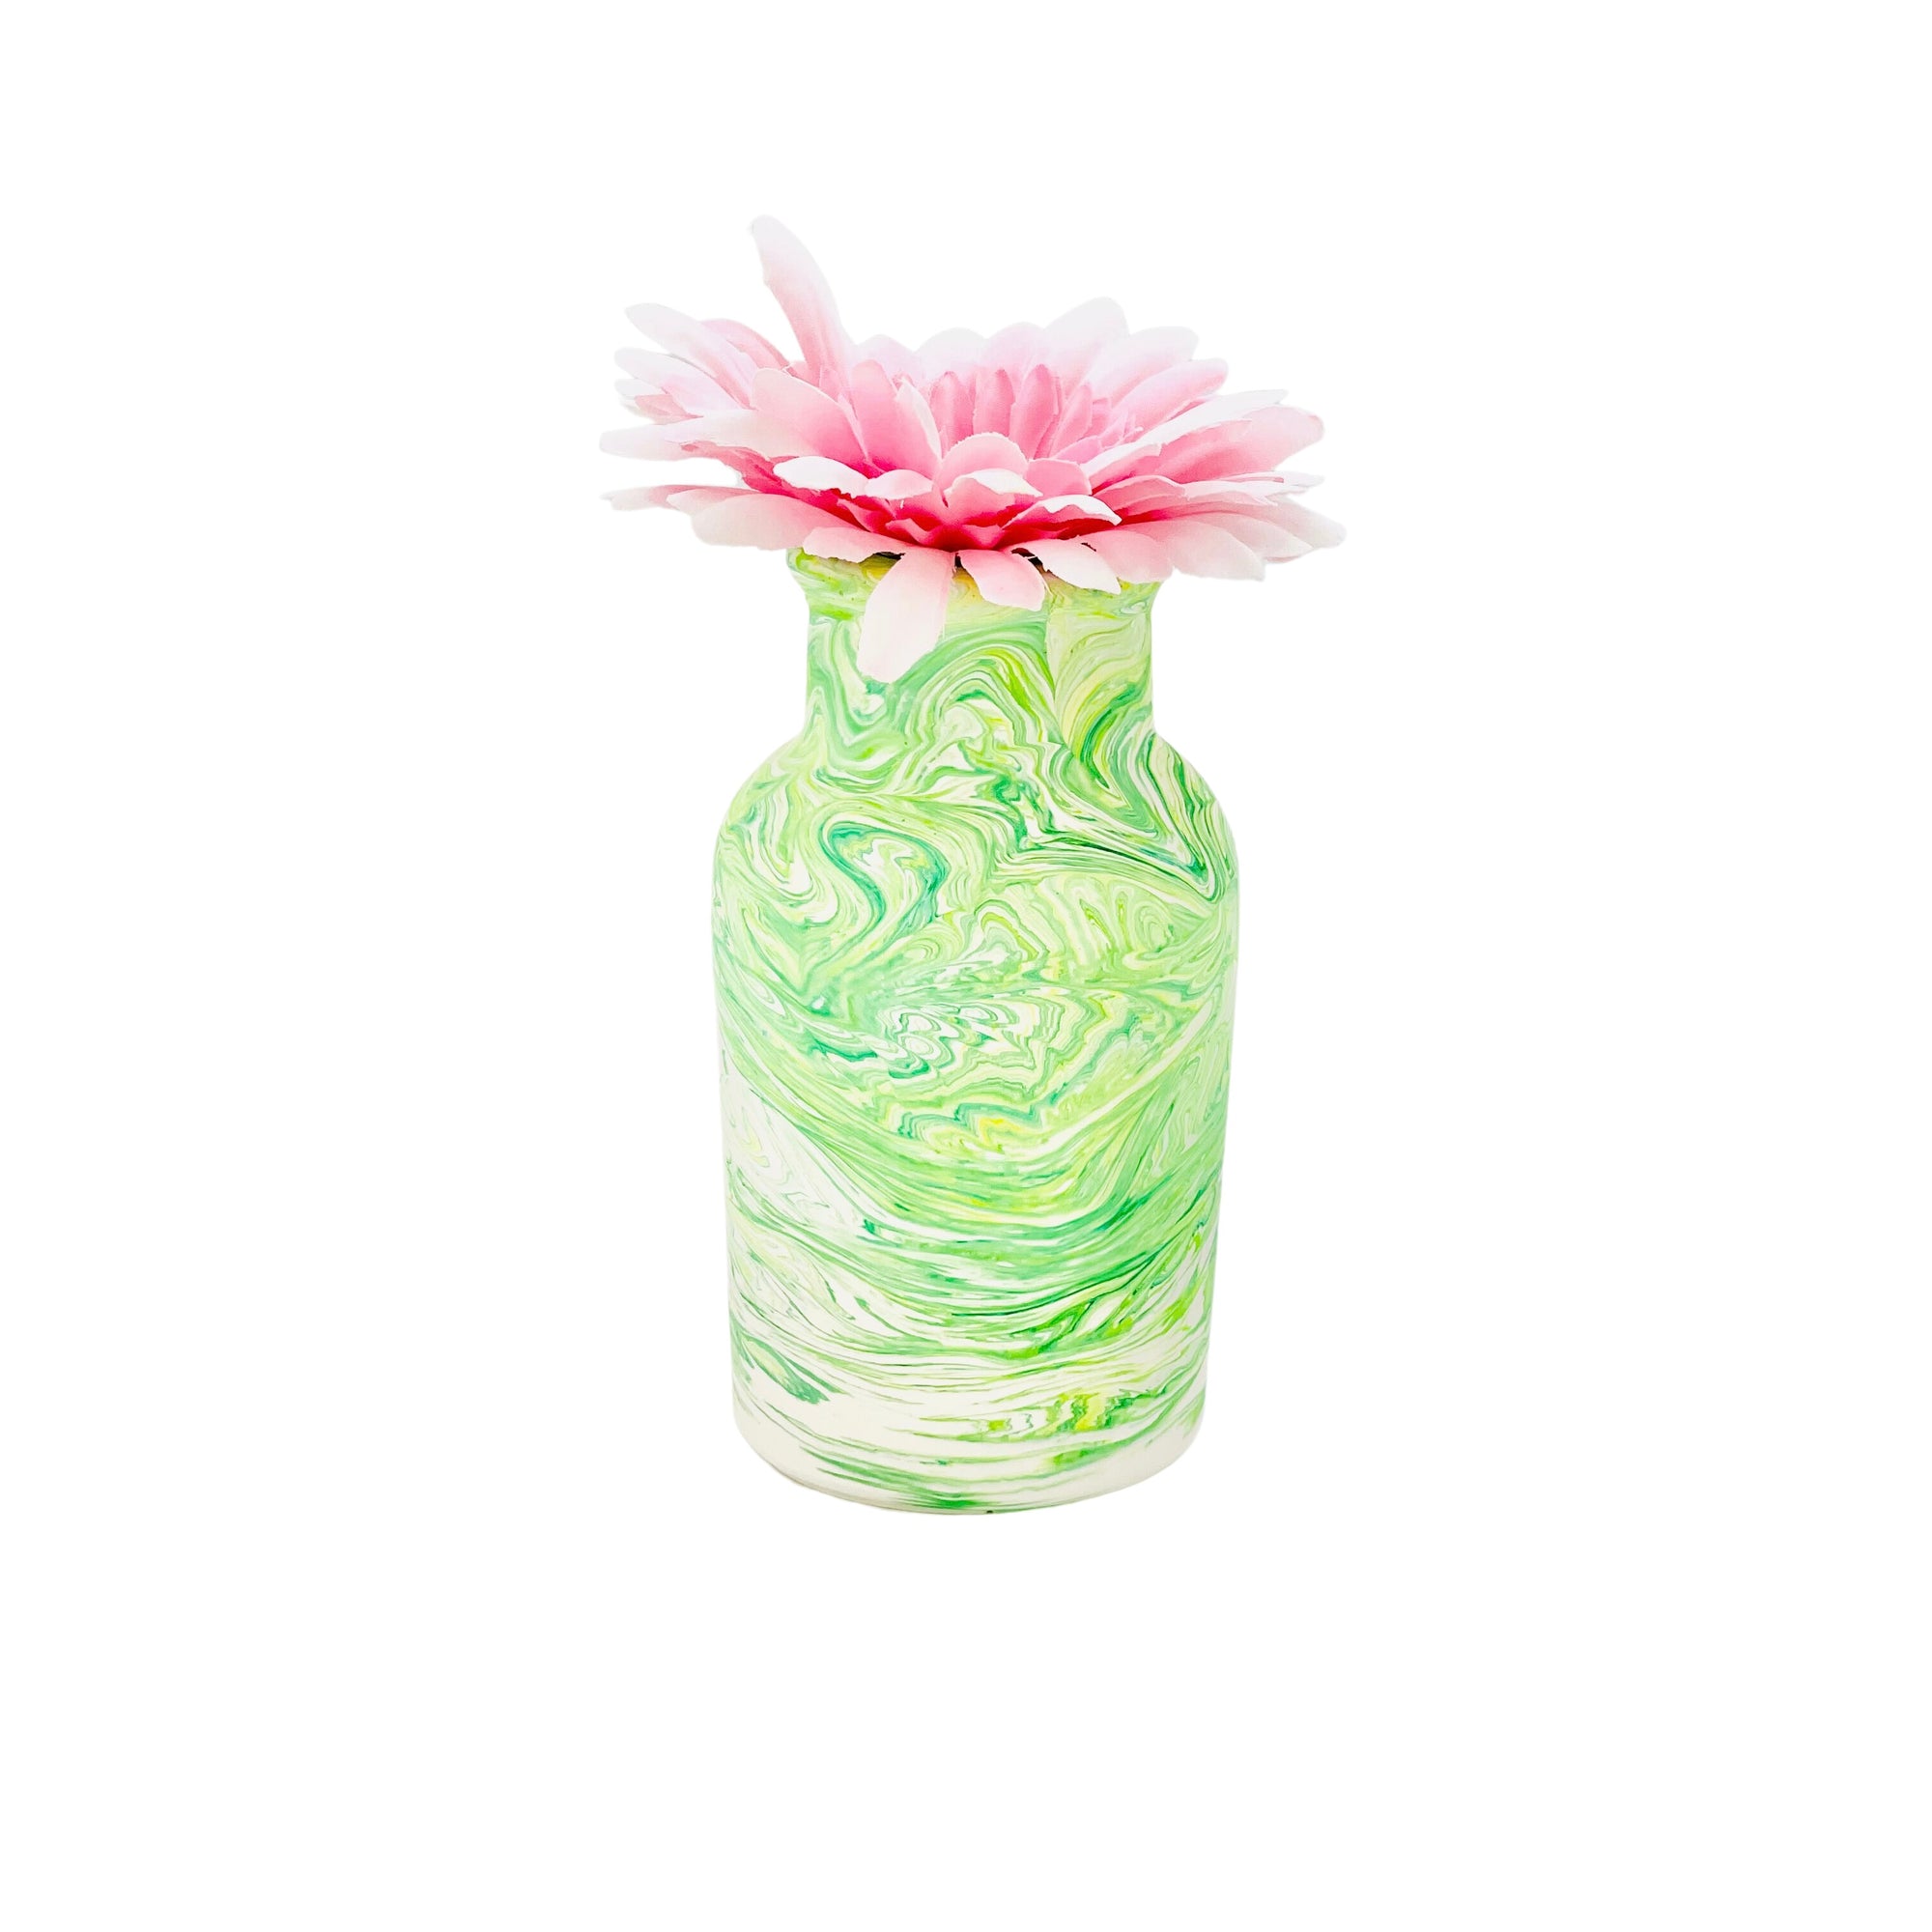 A Jesmonite eco-friendly bottle vase with a neck diameter of 6.50cm marbled with green pigment.